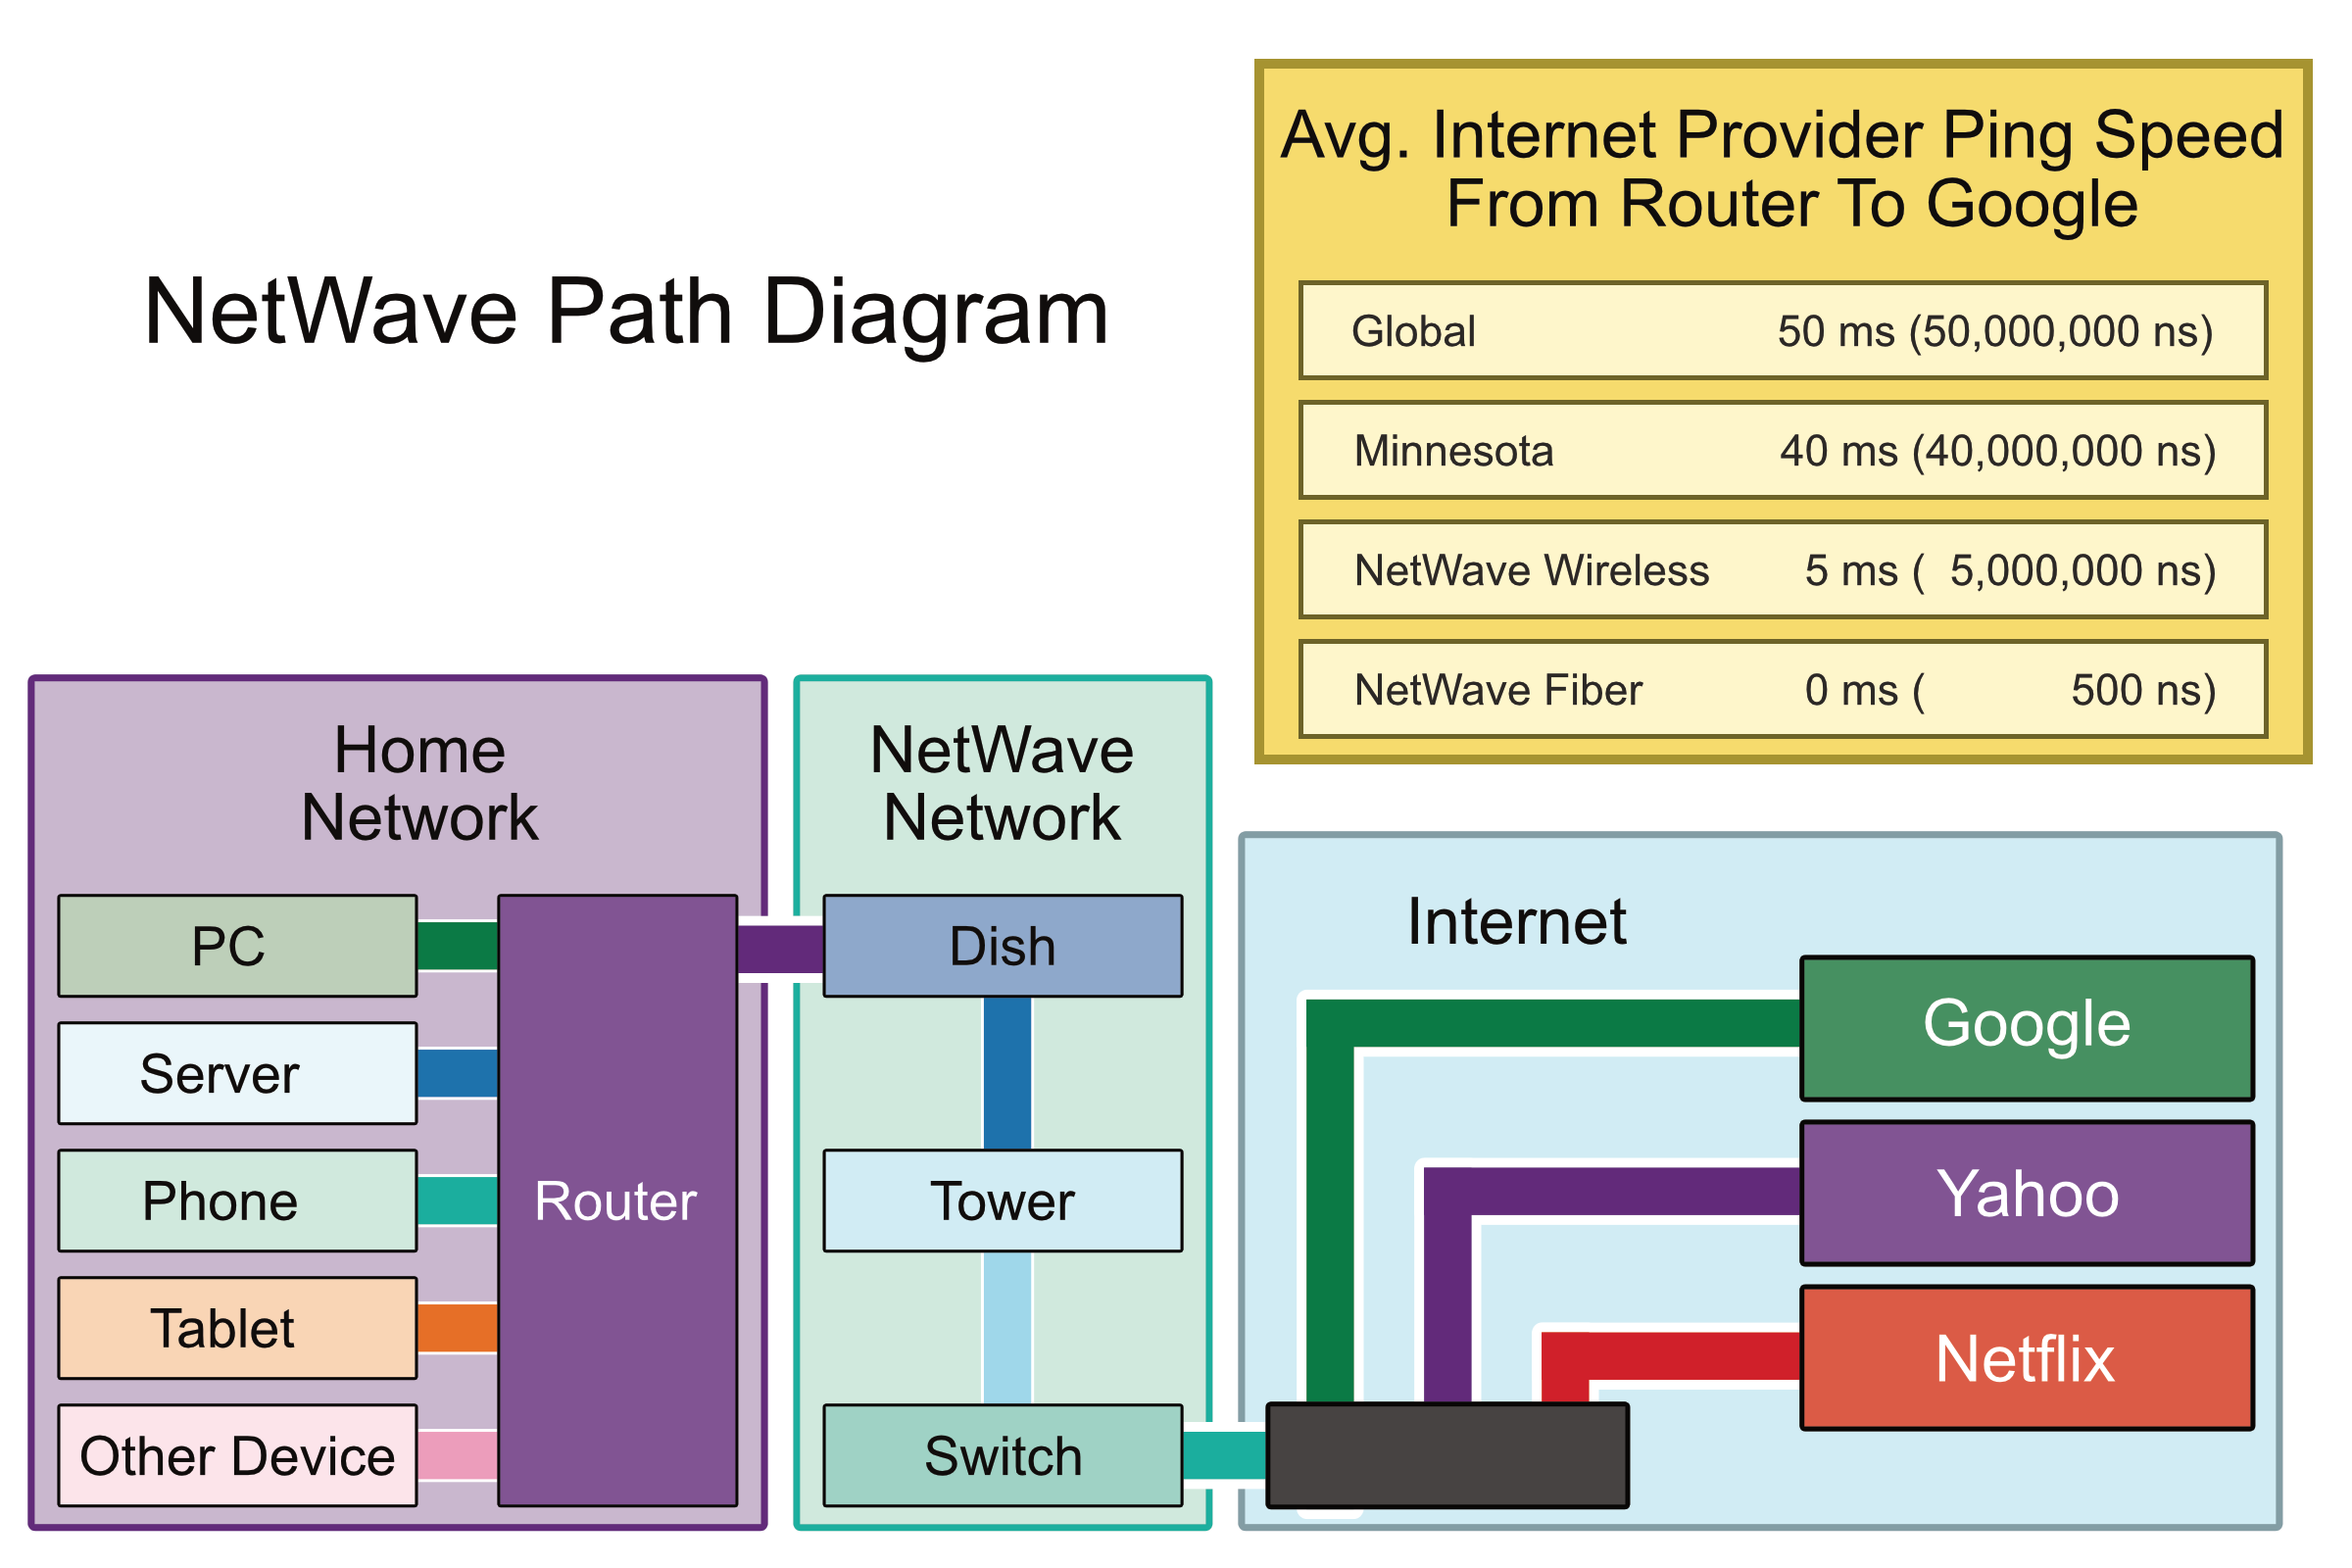 Image of Path from home network to internet through the NetWave network